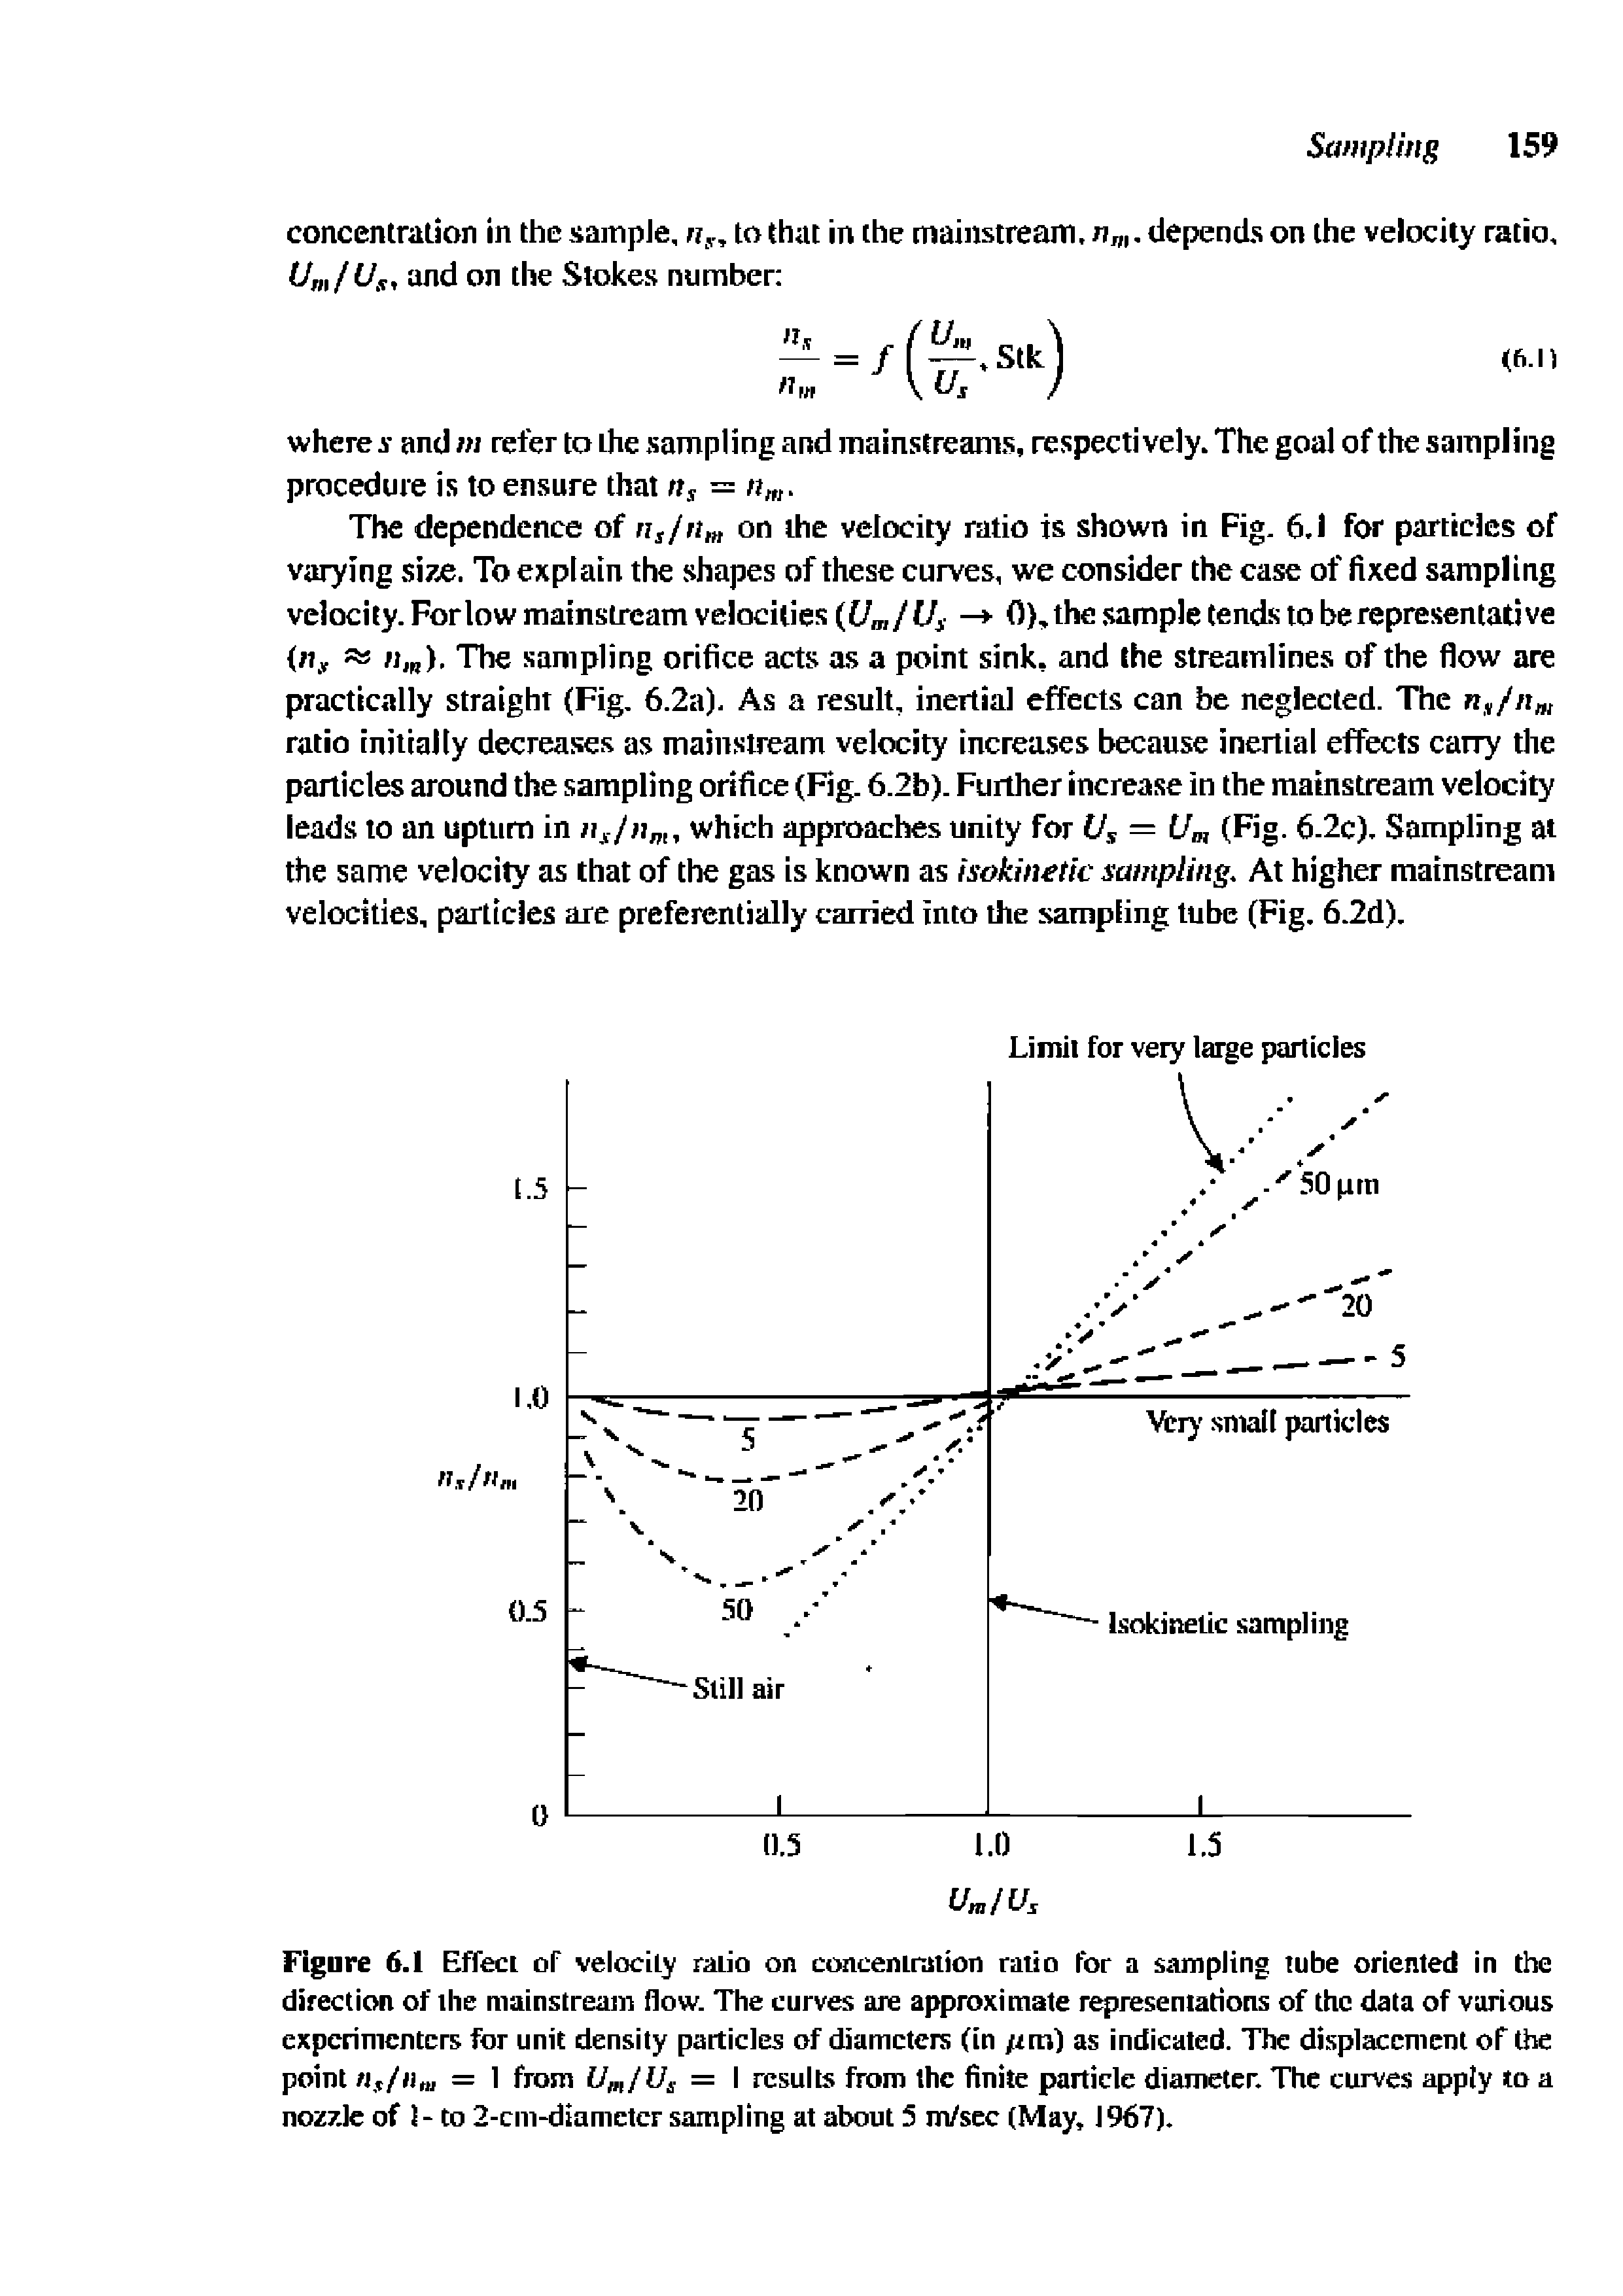 Figure 6.1 Effect of velocity ratio on concentration ratio for a sampling tube oriented in the direction of the mainstream flow. The curves are approximate representations of the data of various experimenters for unit density particles of diameters (in /rn i) as indicated. The displacement of the point tig/iita = 1 from = I results from the finite particle diameter. The curves apply to a...